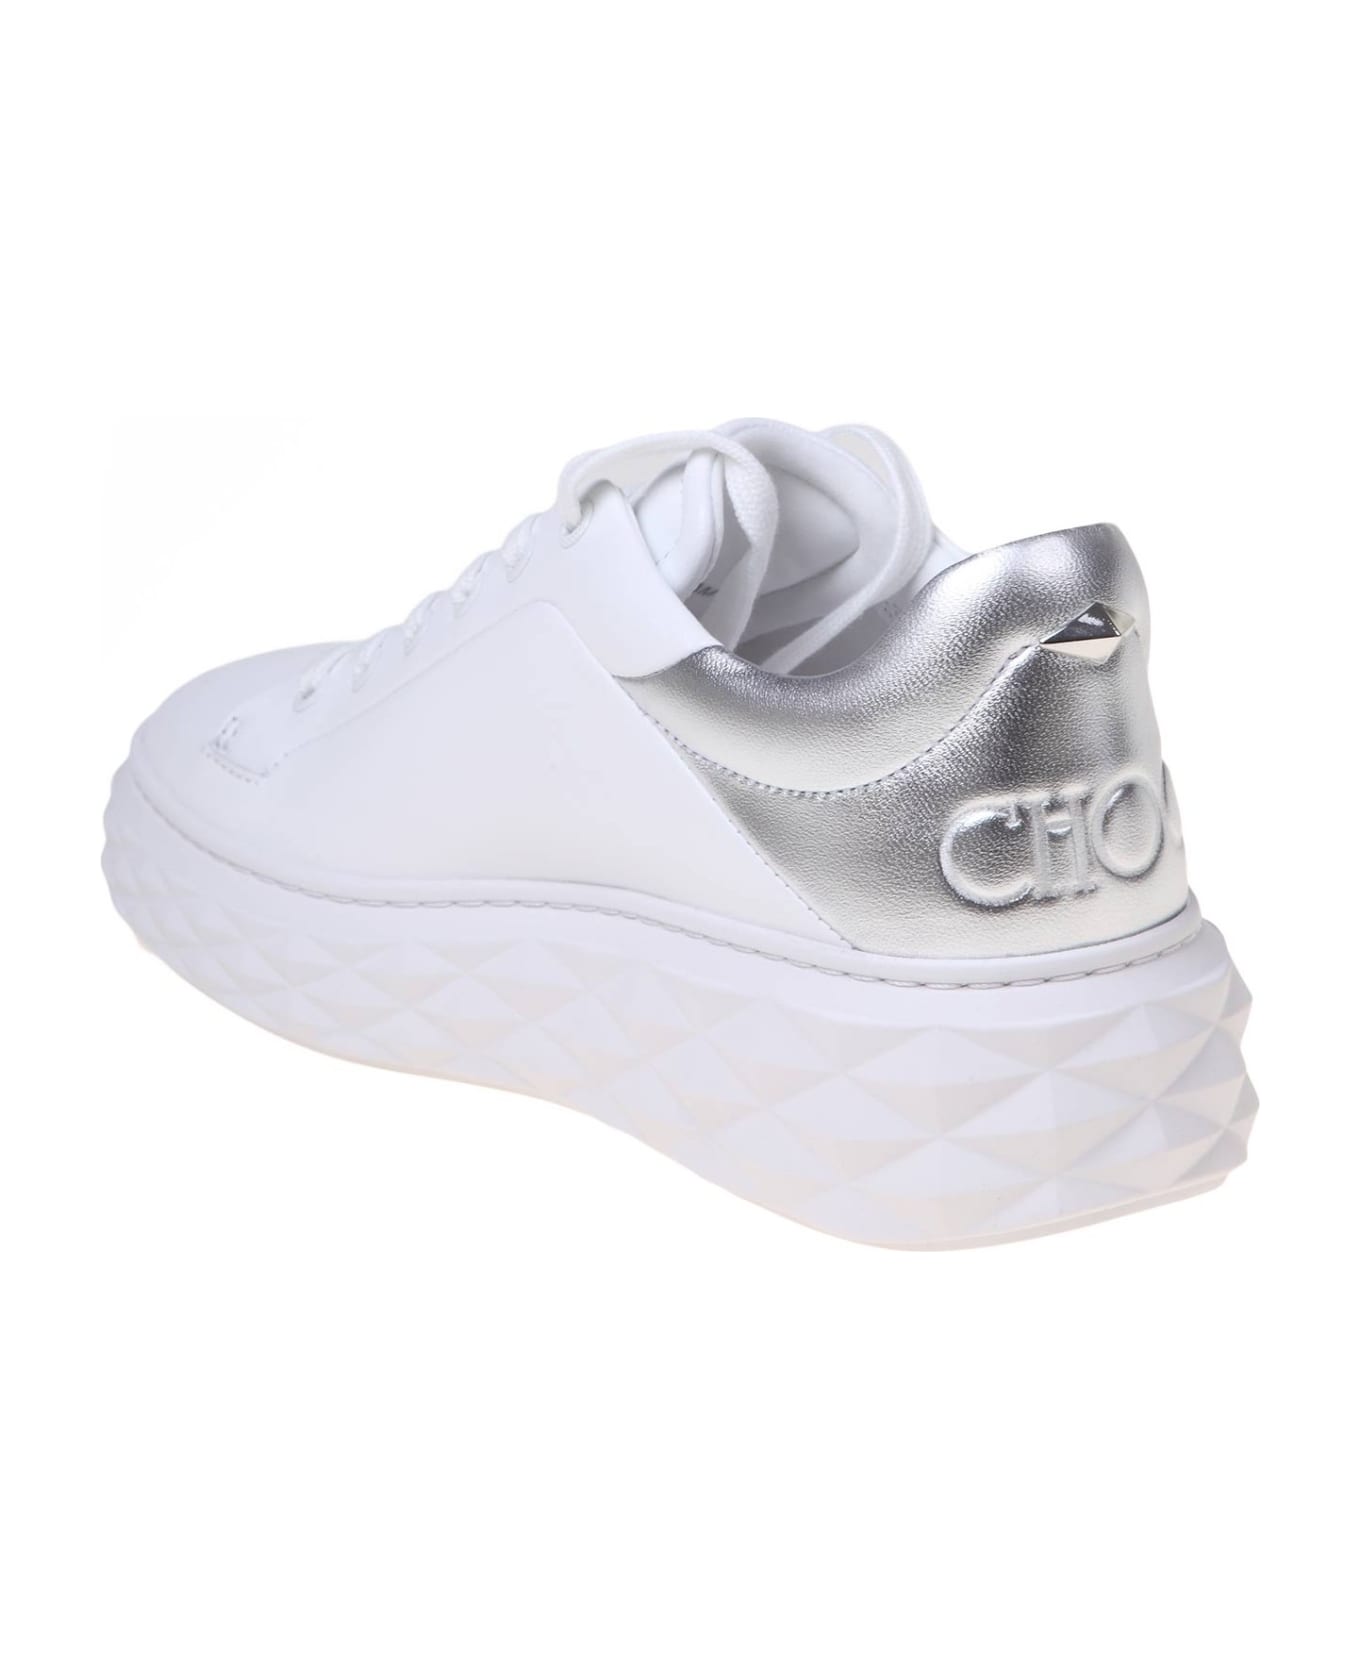 Jimmy Choo Diamond Maxi Sneakers In White And Silver Leather - White/Silver スニーカー